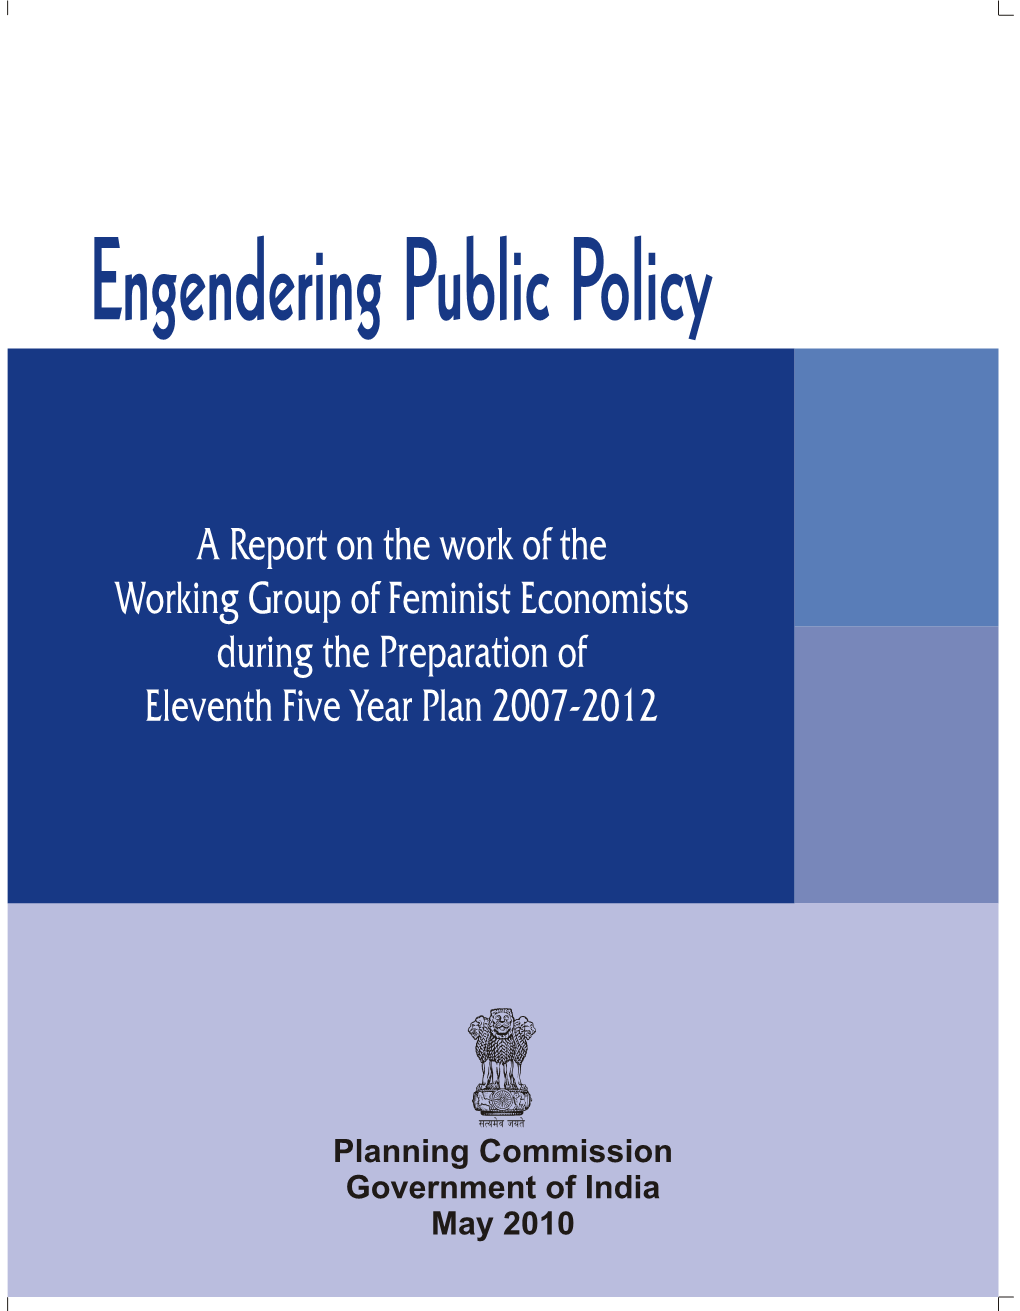 Engendering Public Policy.Pmd